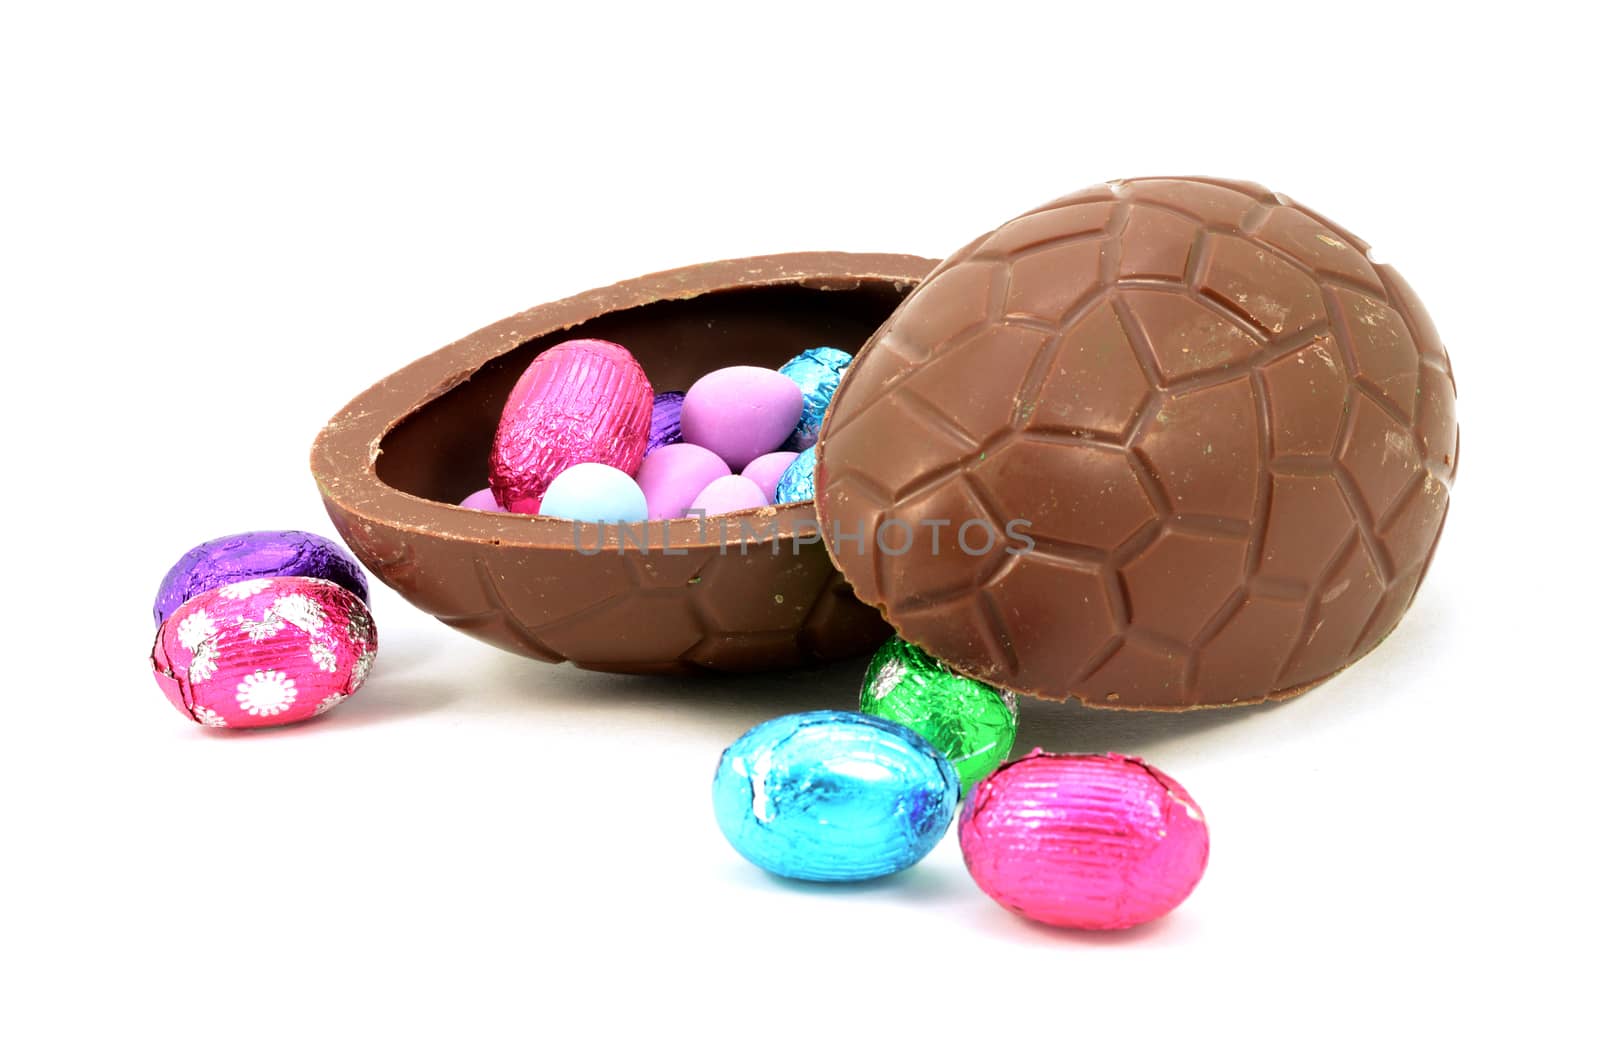 An isolated over white hollow chocolate Easter egg filled with candy.